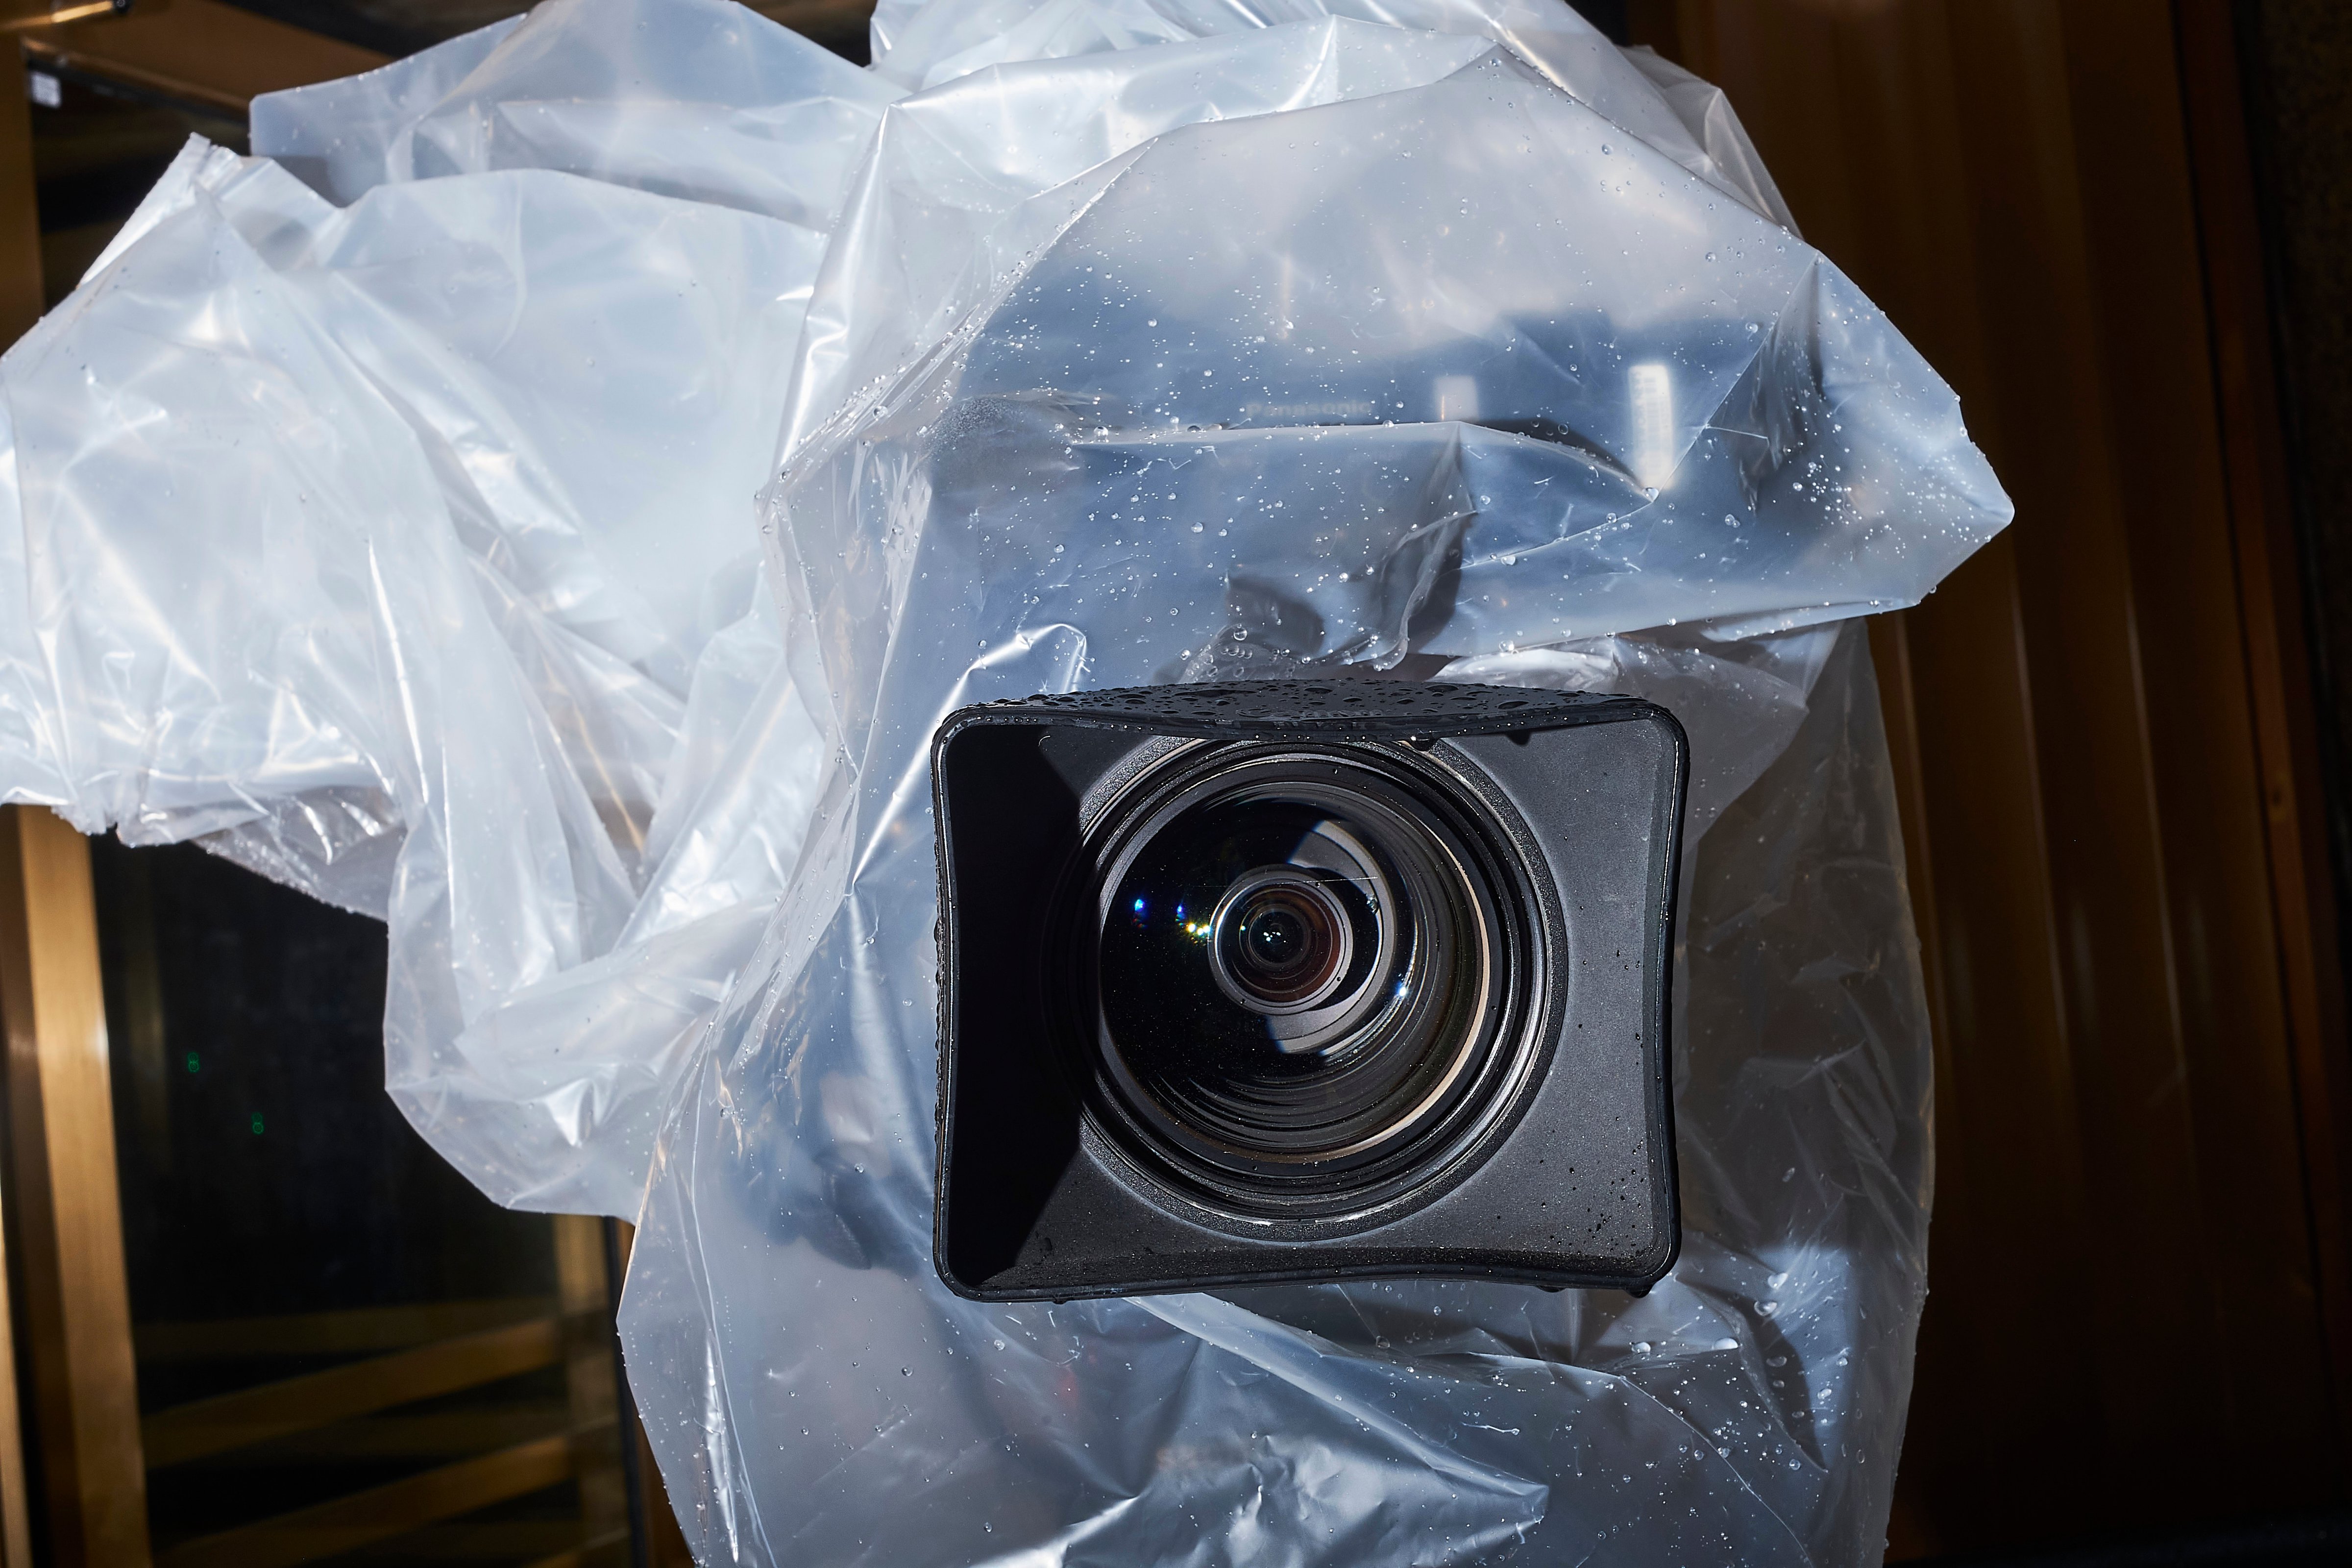 A television camera is protected from rain outside the New York City Criminal Court, Jan. 16 (John Taggart)